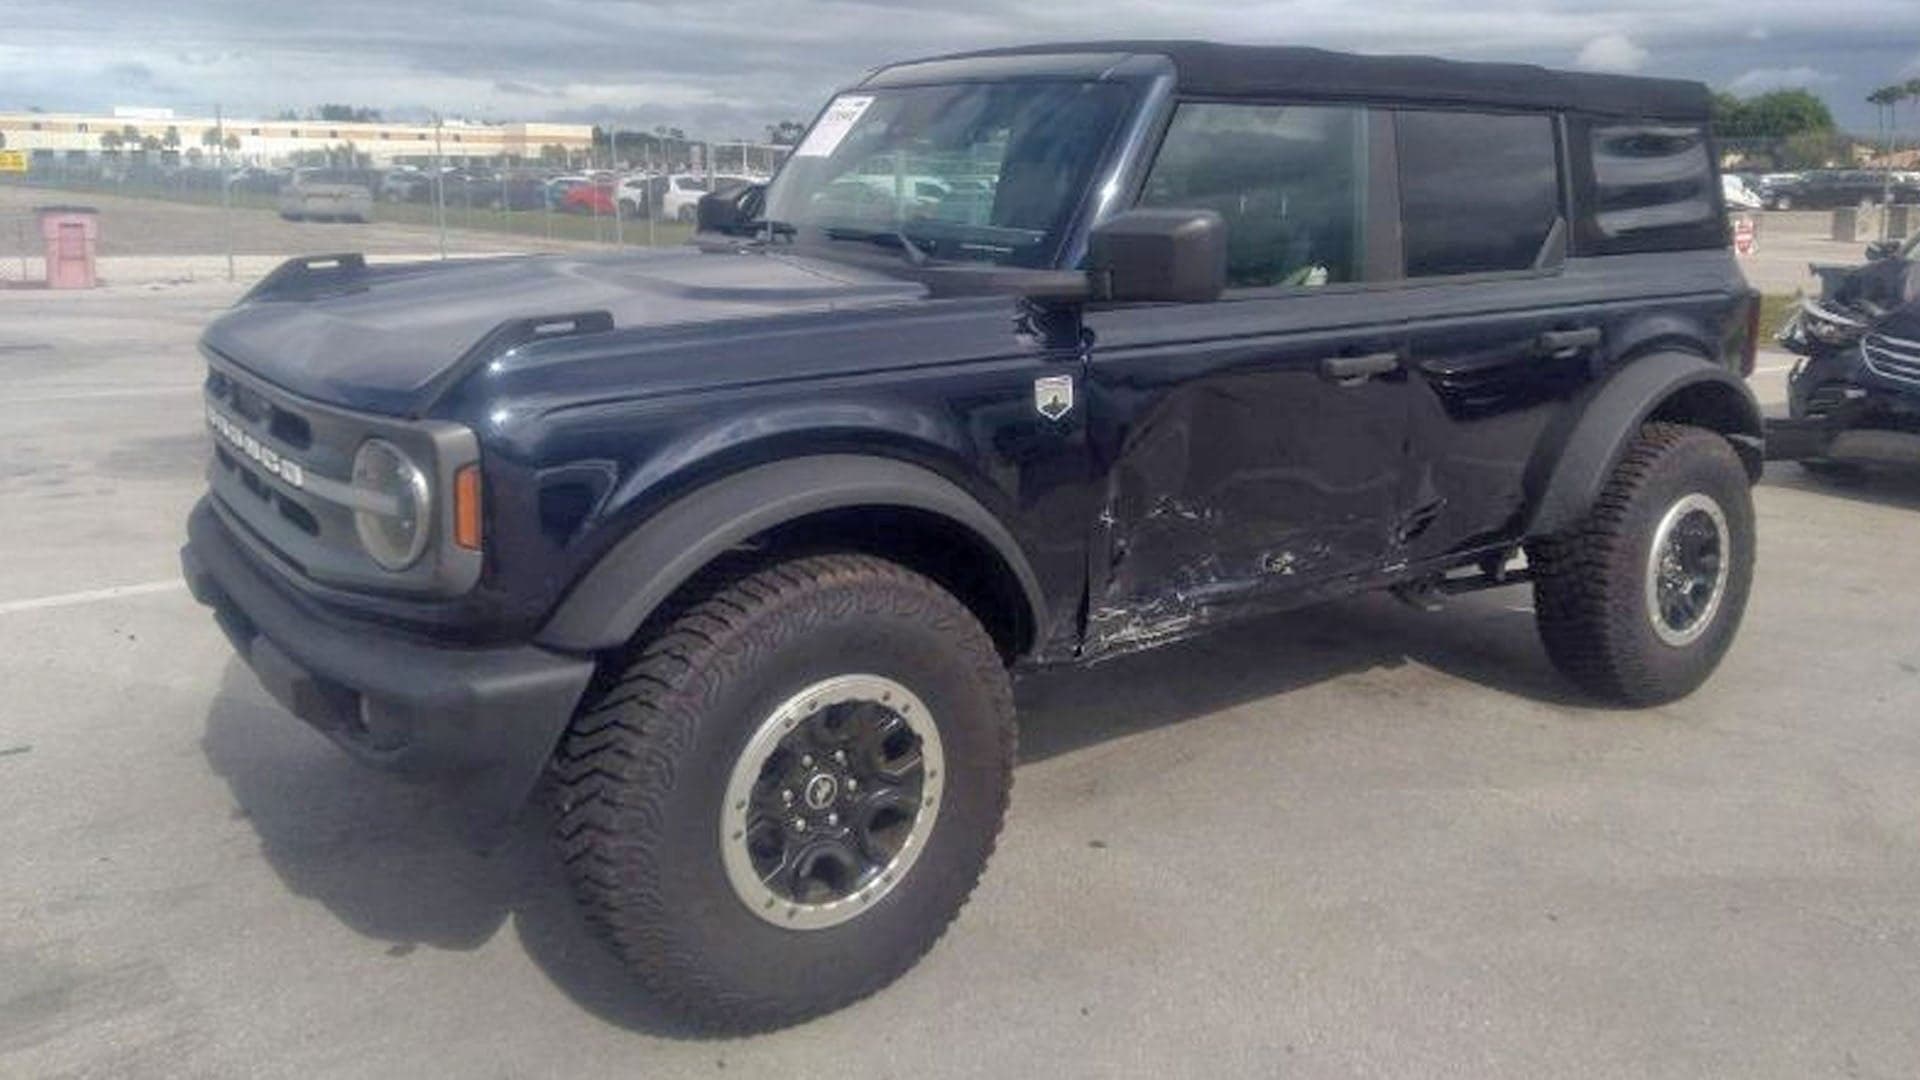 The Salvage Ford Bronco Auctions Are Here if You’re Sick of Dealer Markups